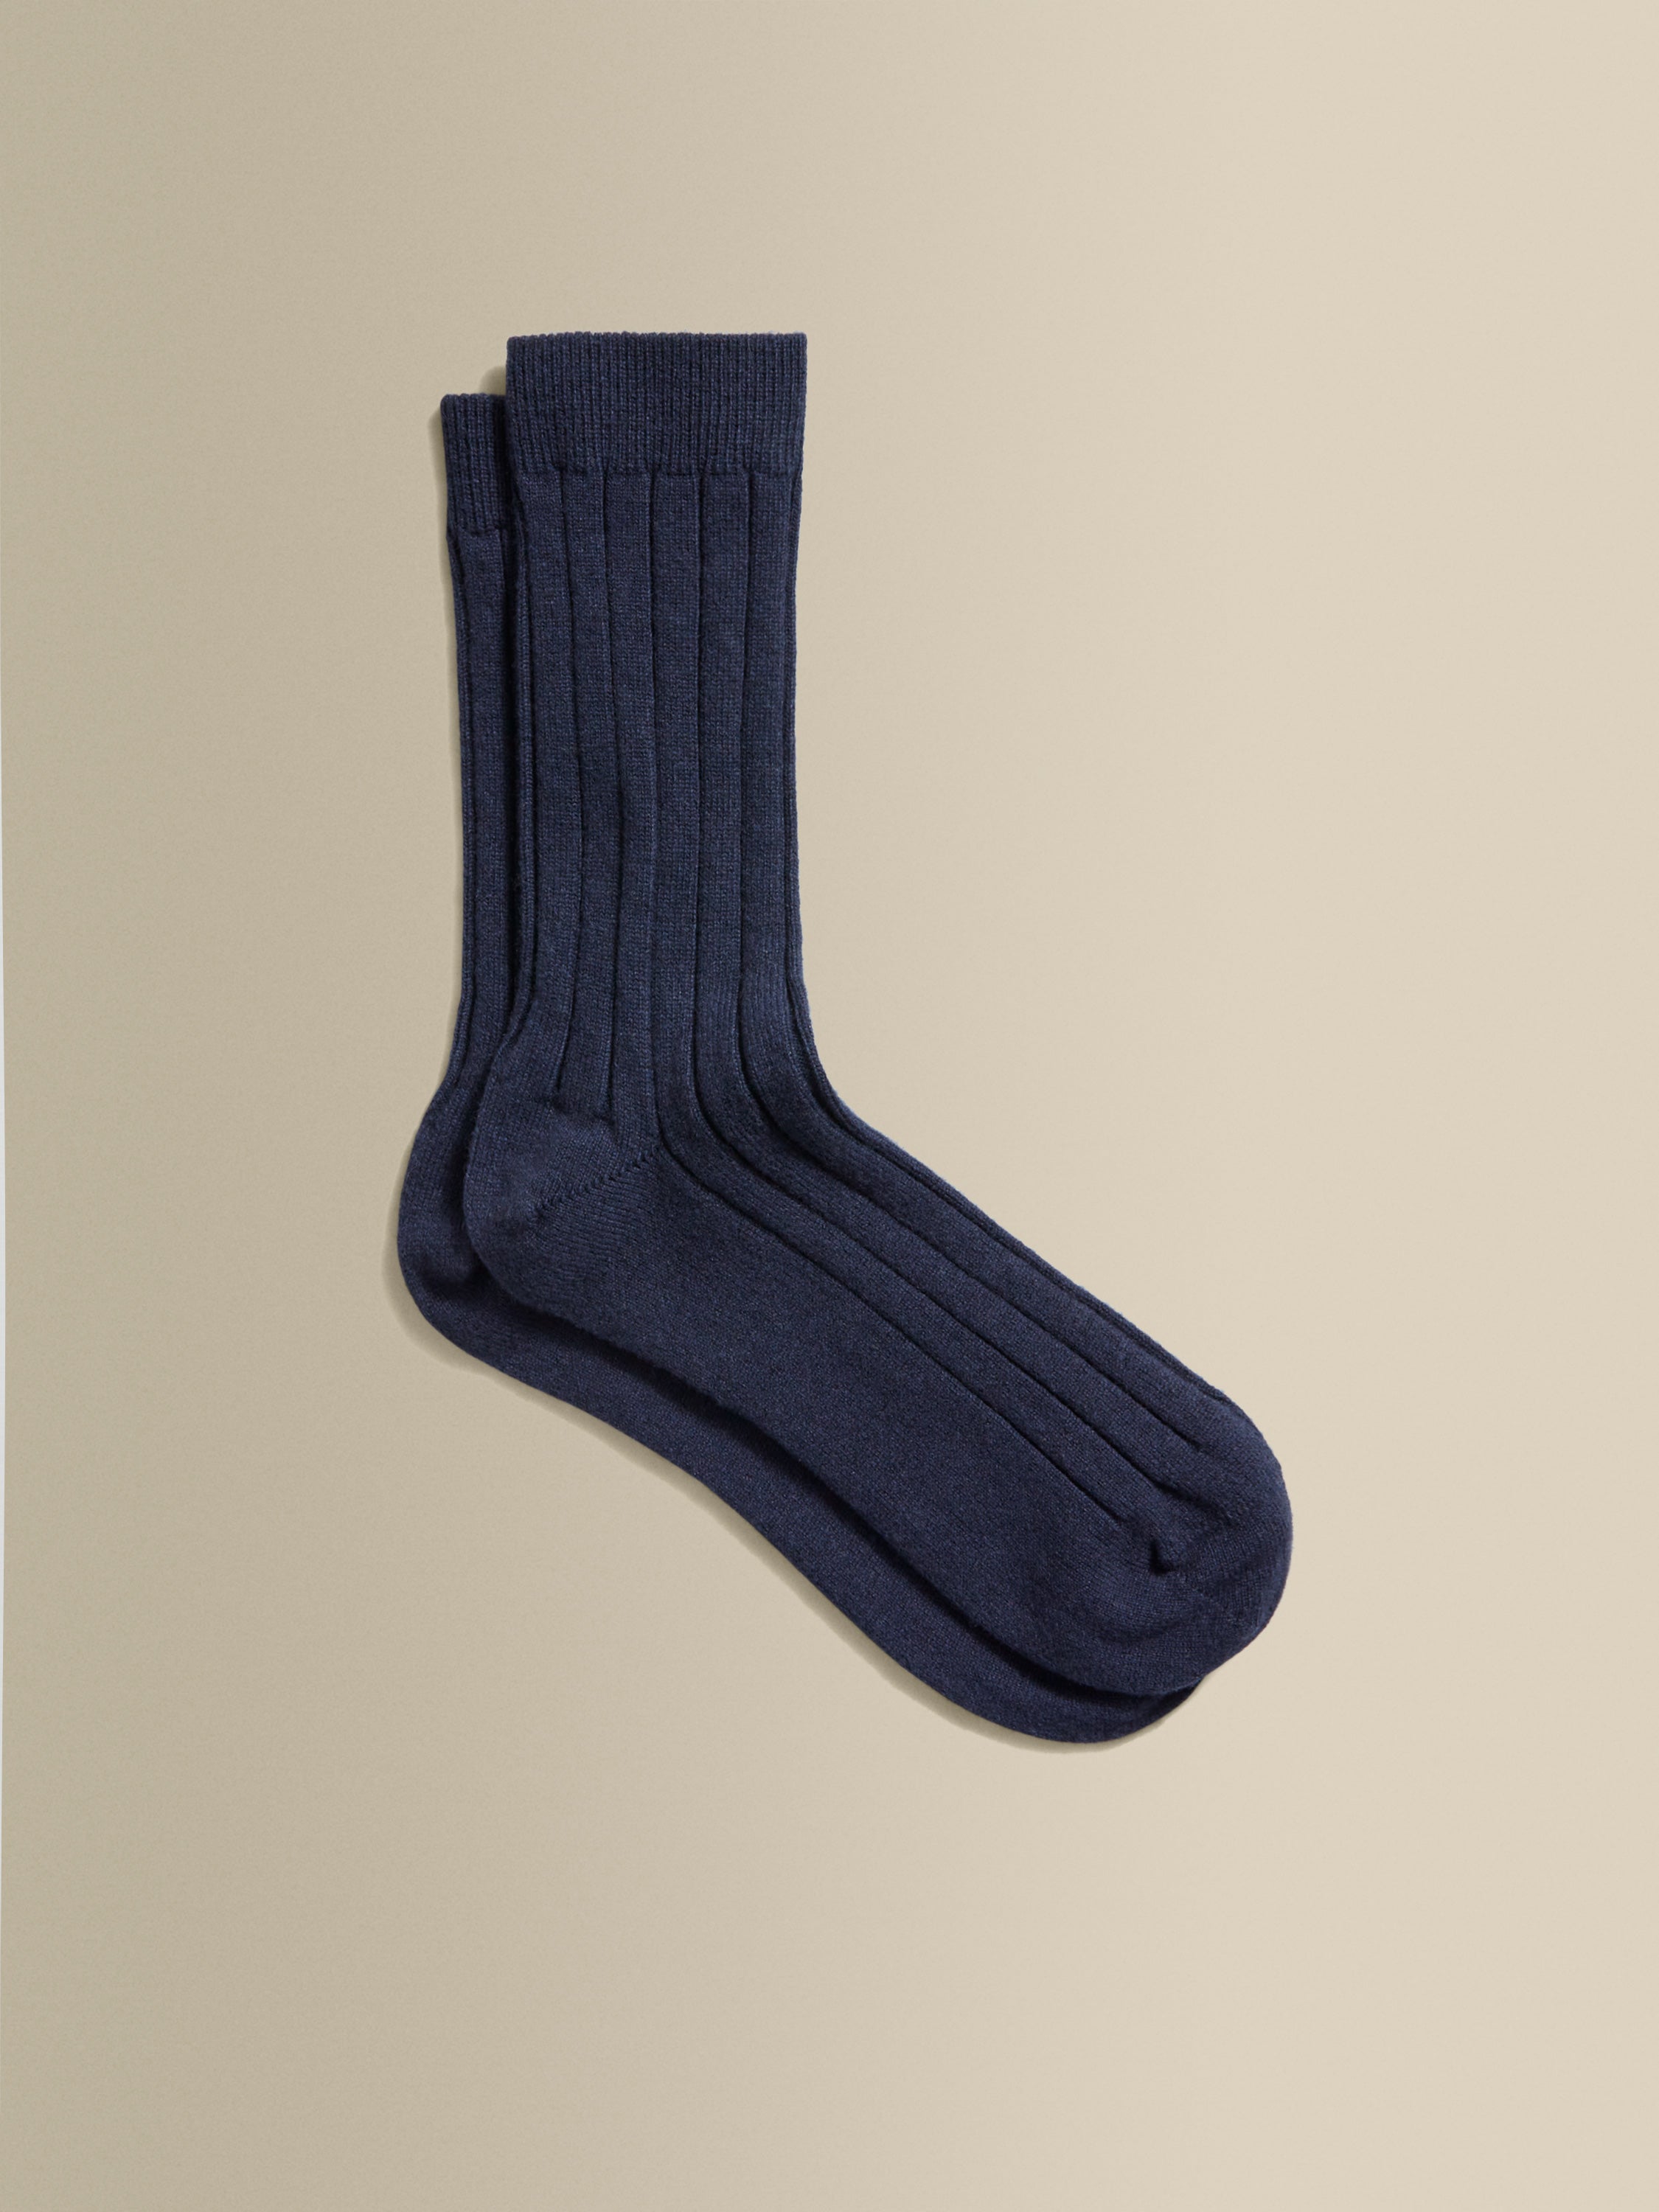 Cashmere Knitted Socks Navy Product Image